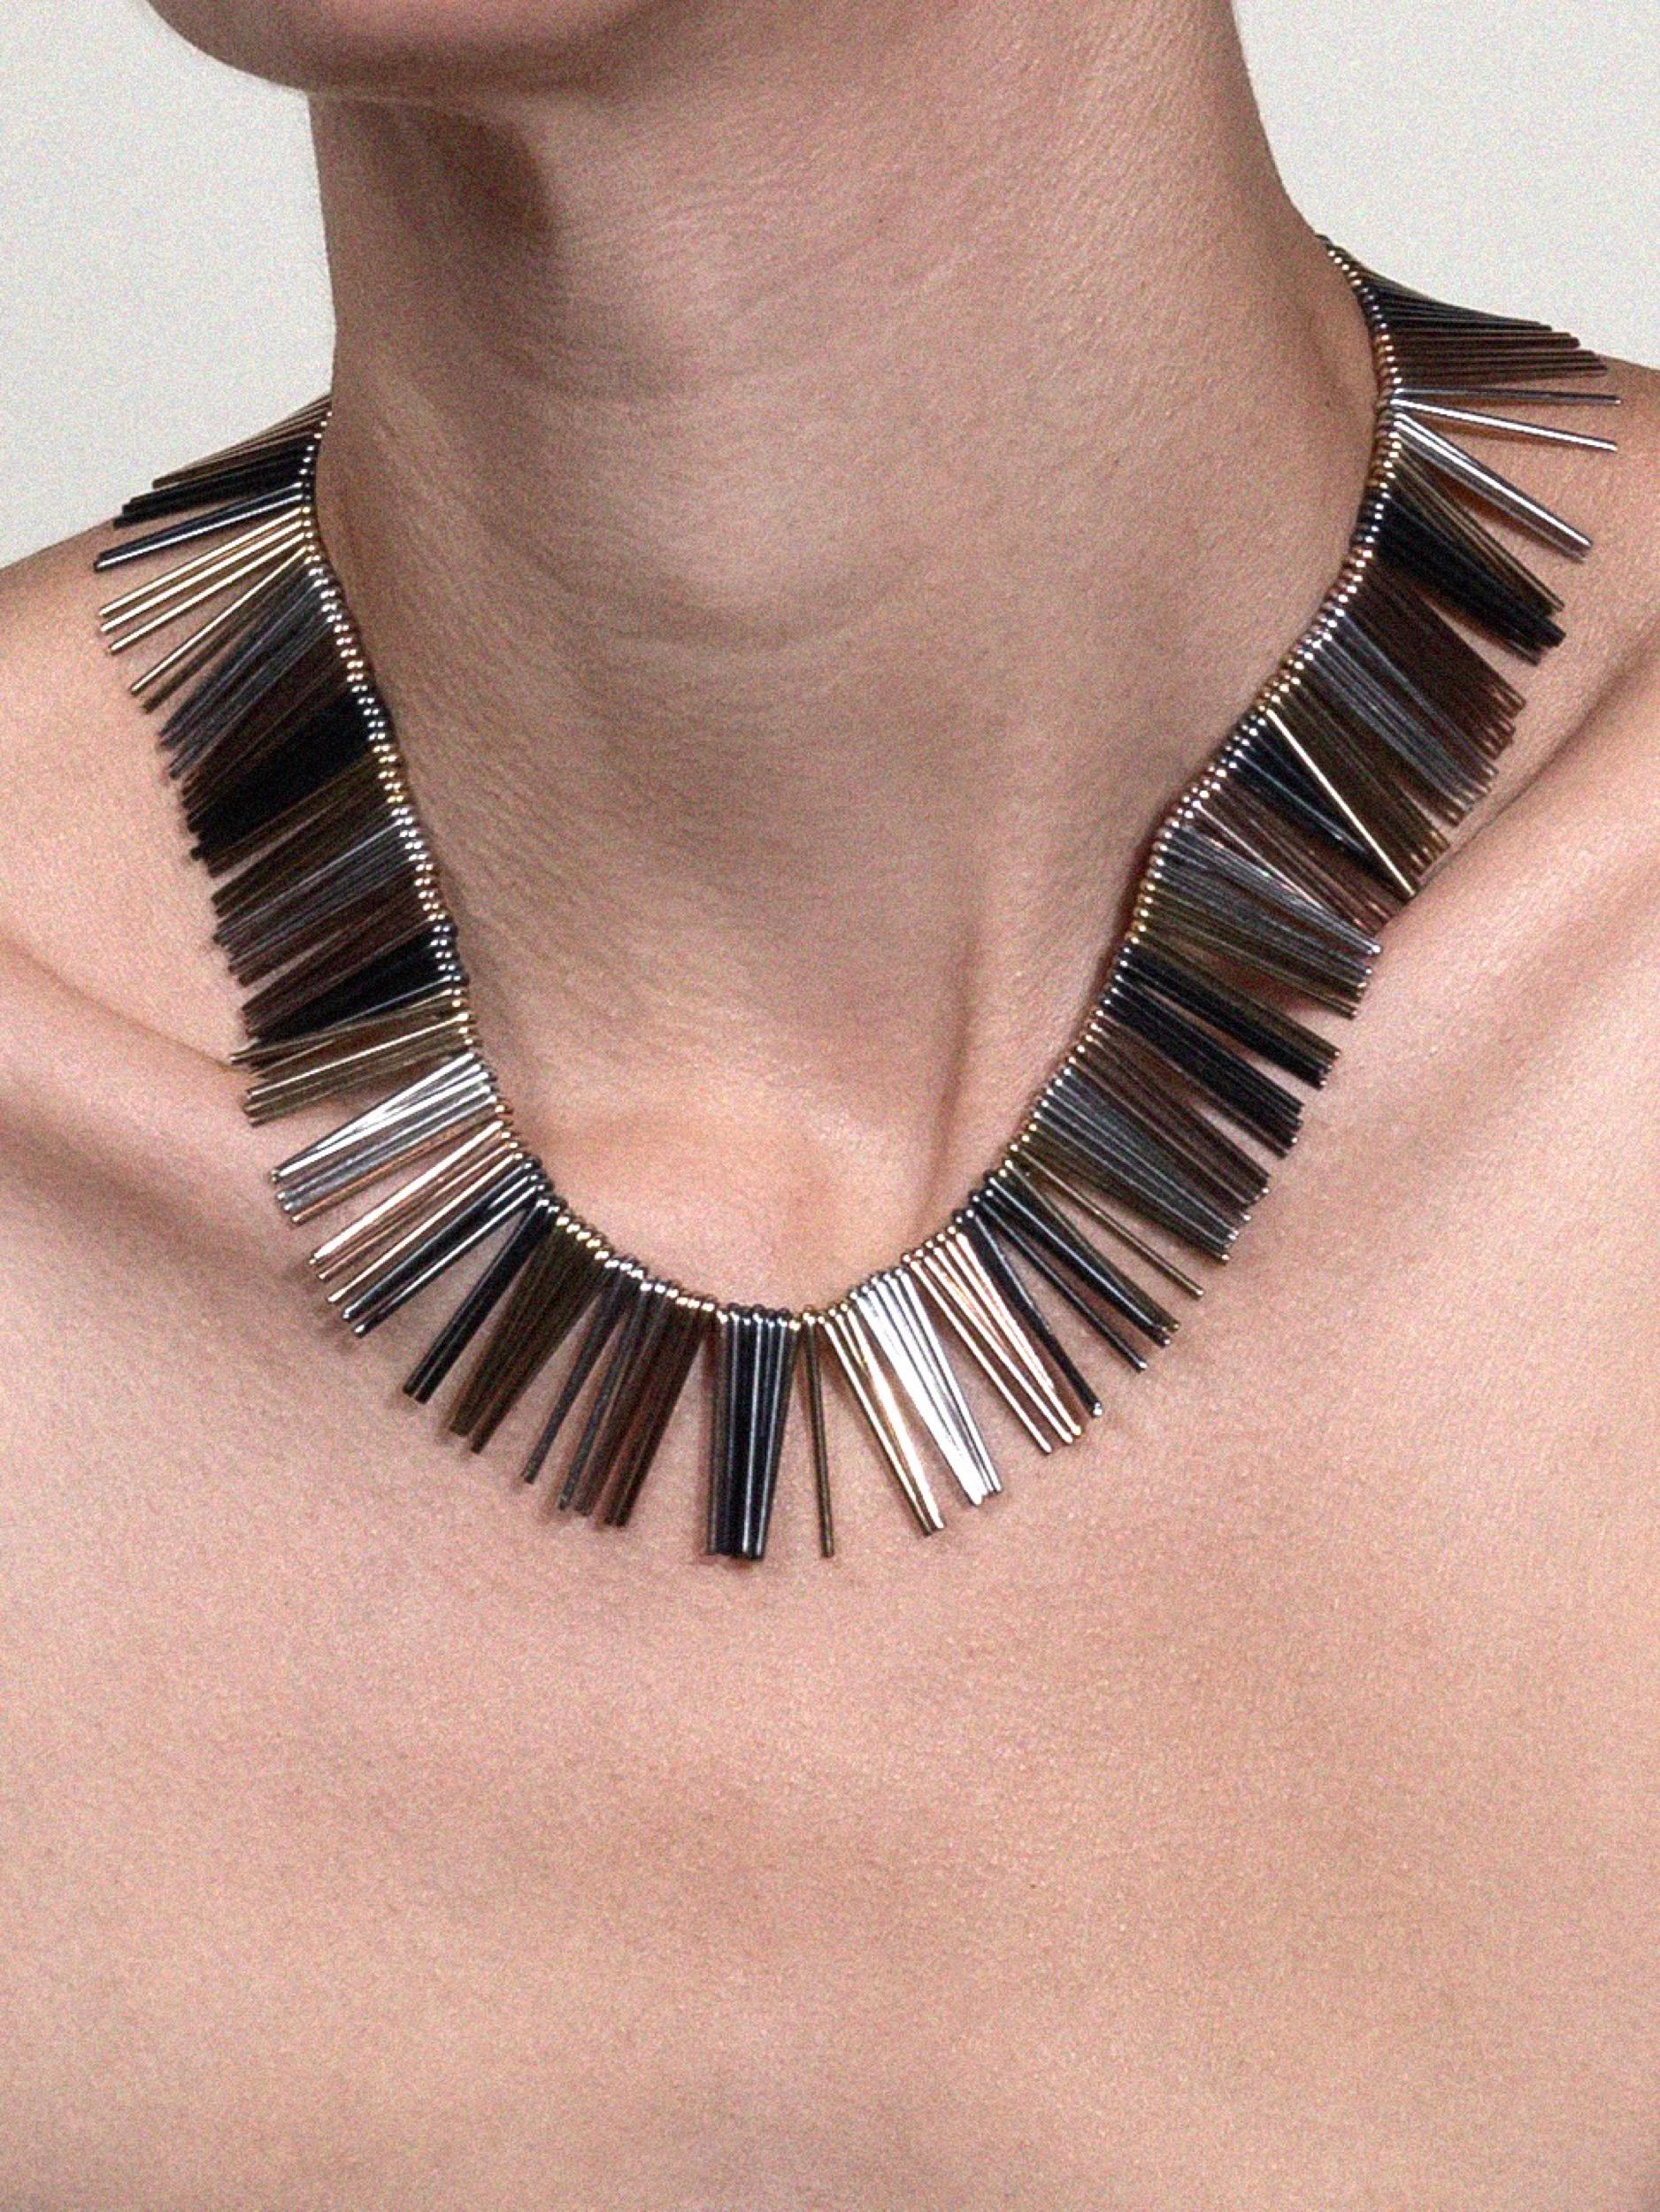 Anton Michelsen Four Color Fringe Necklace 
Designed by Eigil Jensen for A. Michelsen
Sterling Silver Tines in Silver, Plated Yellow Gold, Plated Rose Gold, and Plated Pewter/Oxidized Silver
Hundreds of solid silver tines alternating by color
Tines